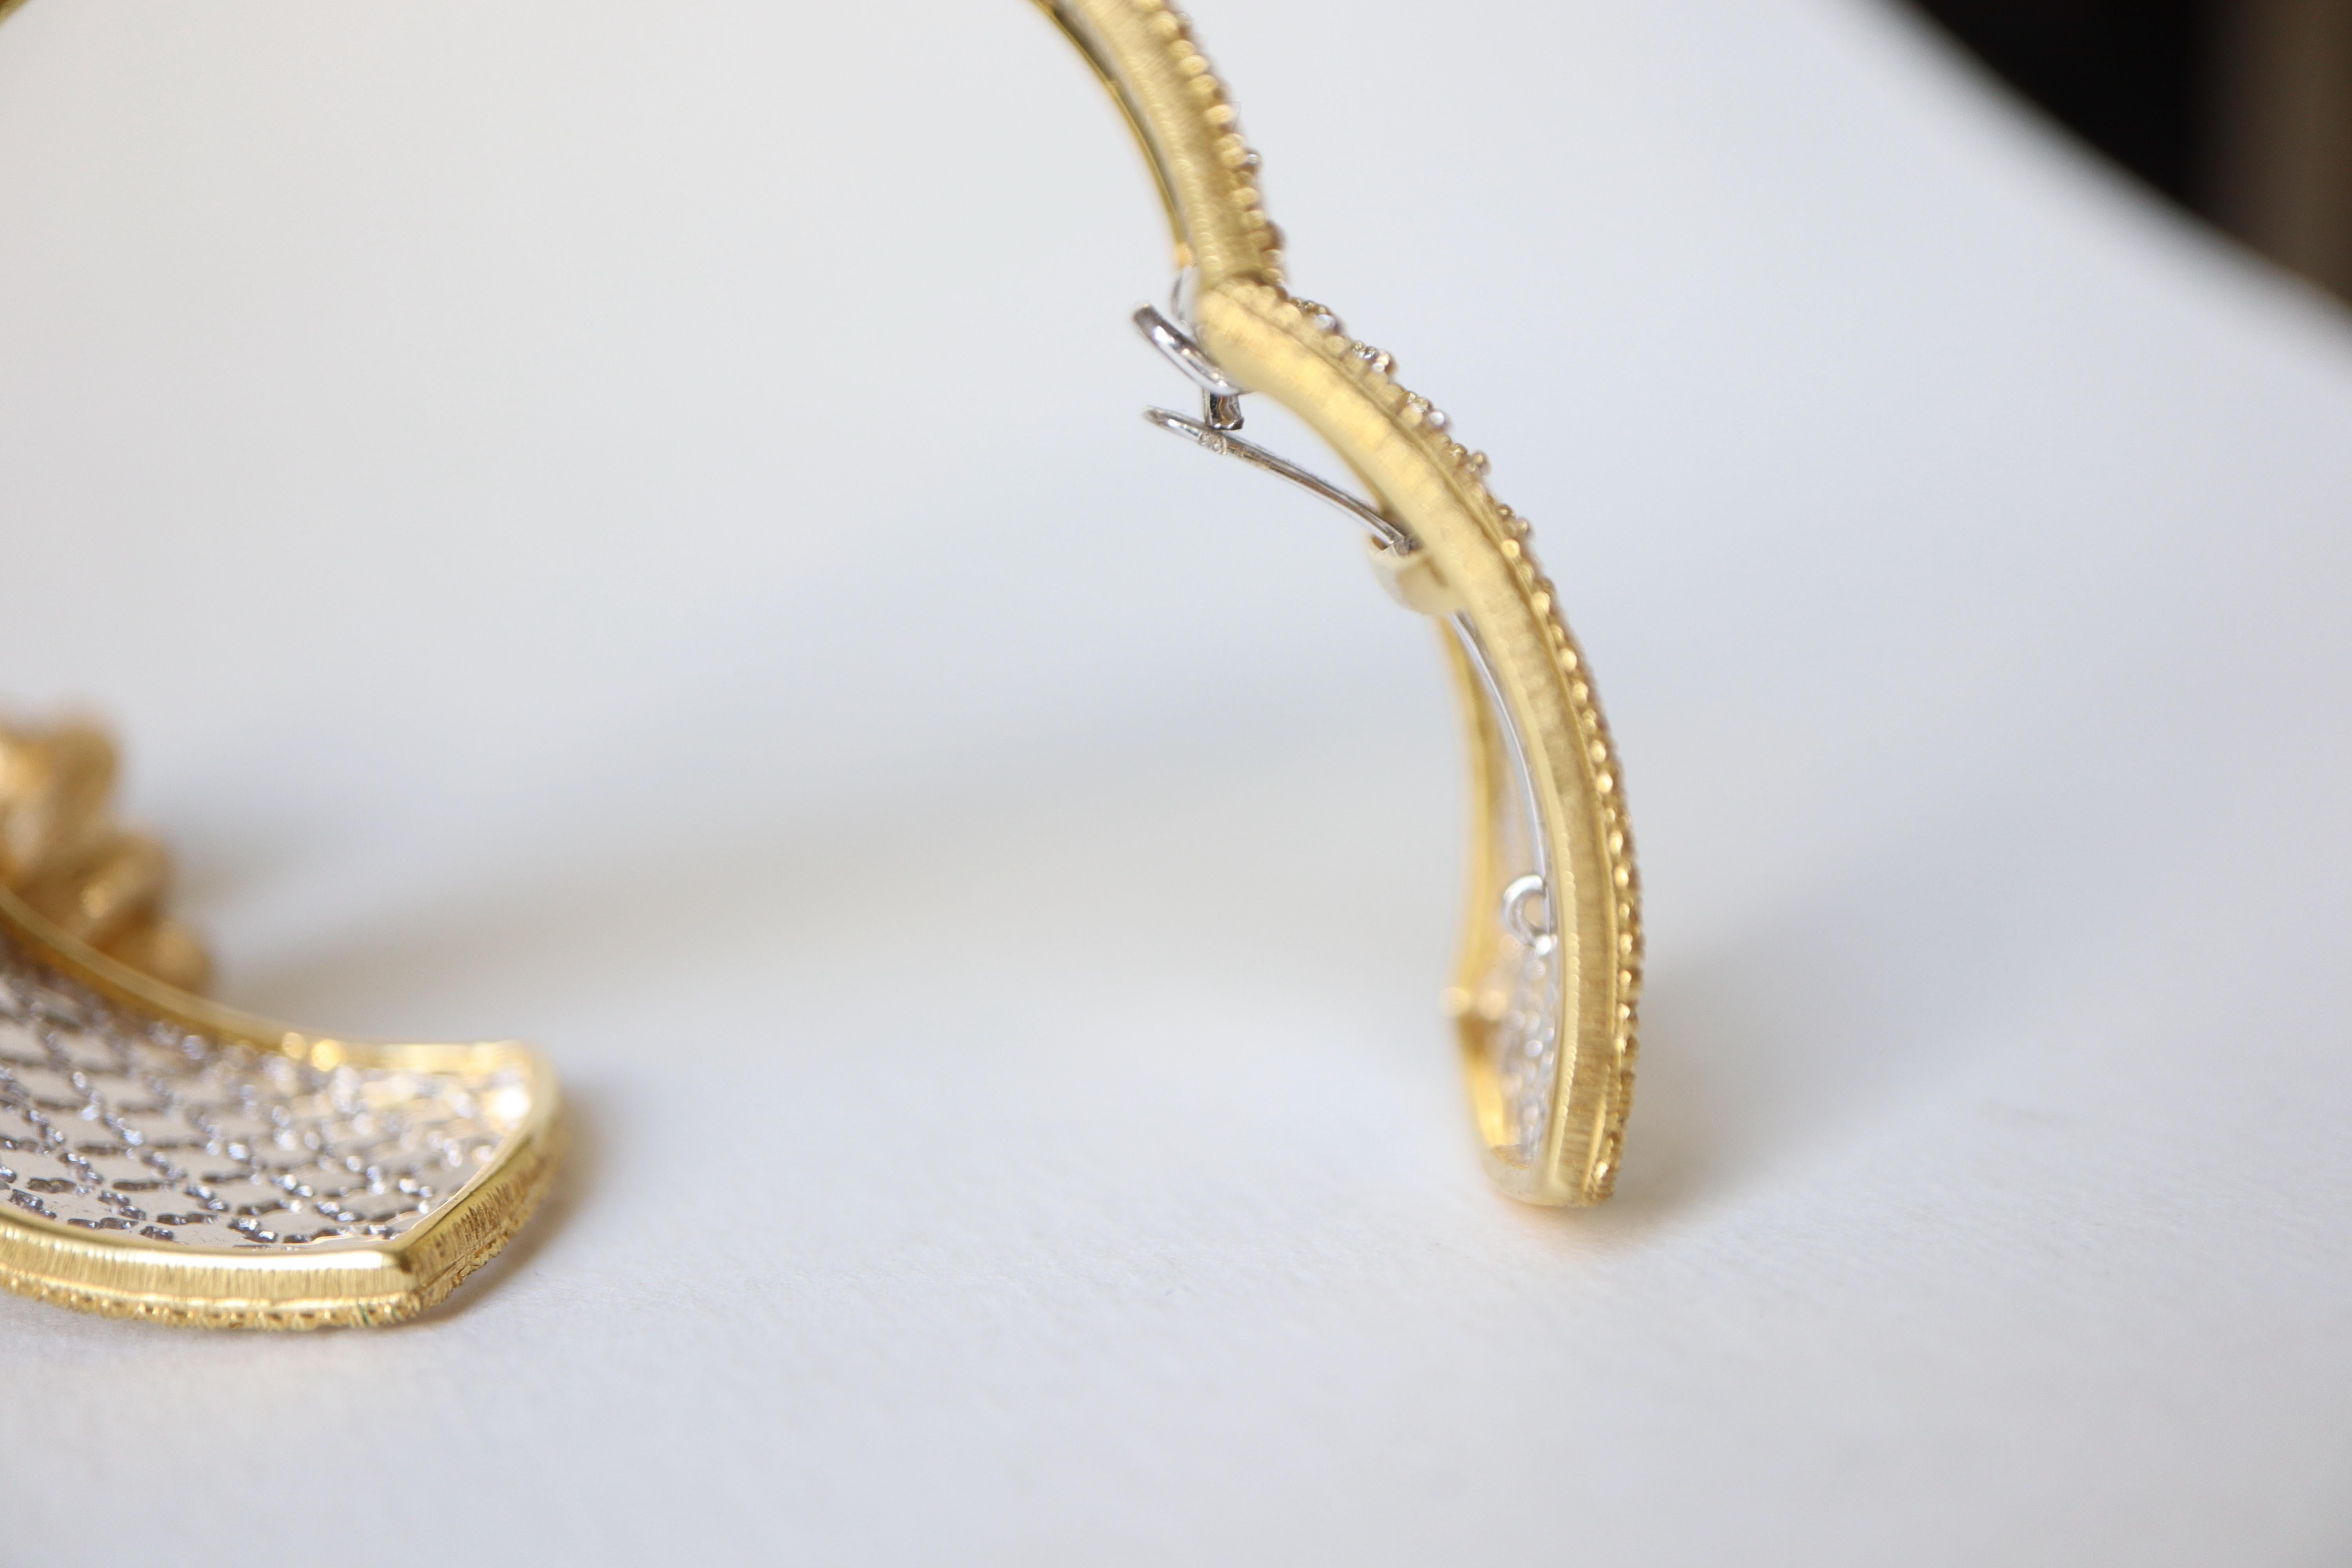 Bracelet Bangle Yellow Withe Gold 18k 3.51 Carats of Diamonds For Sale 5